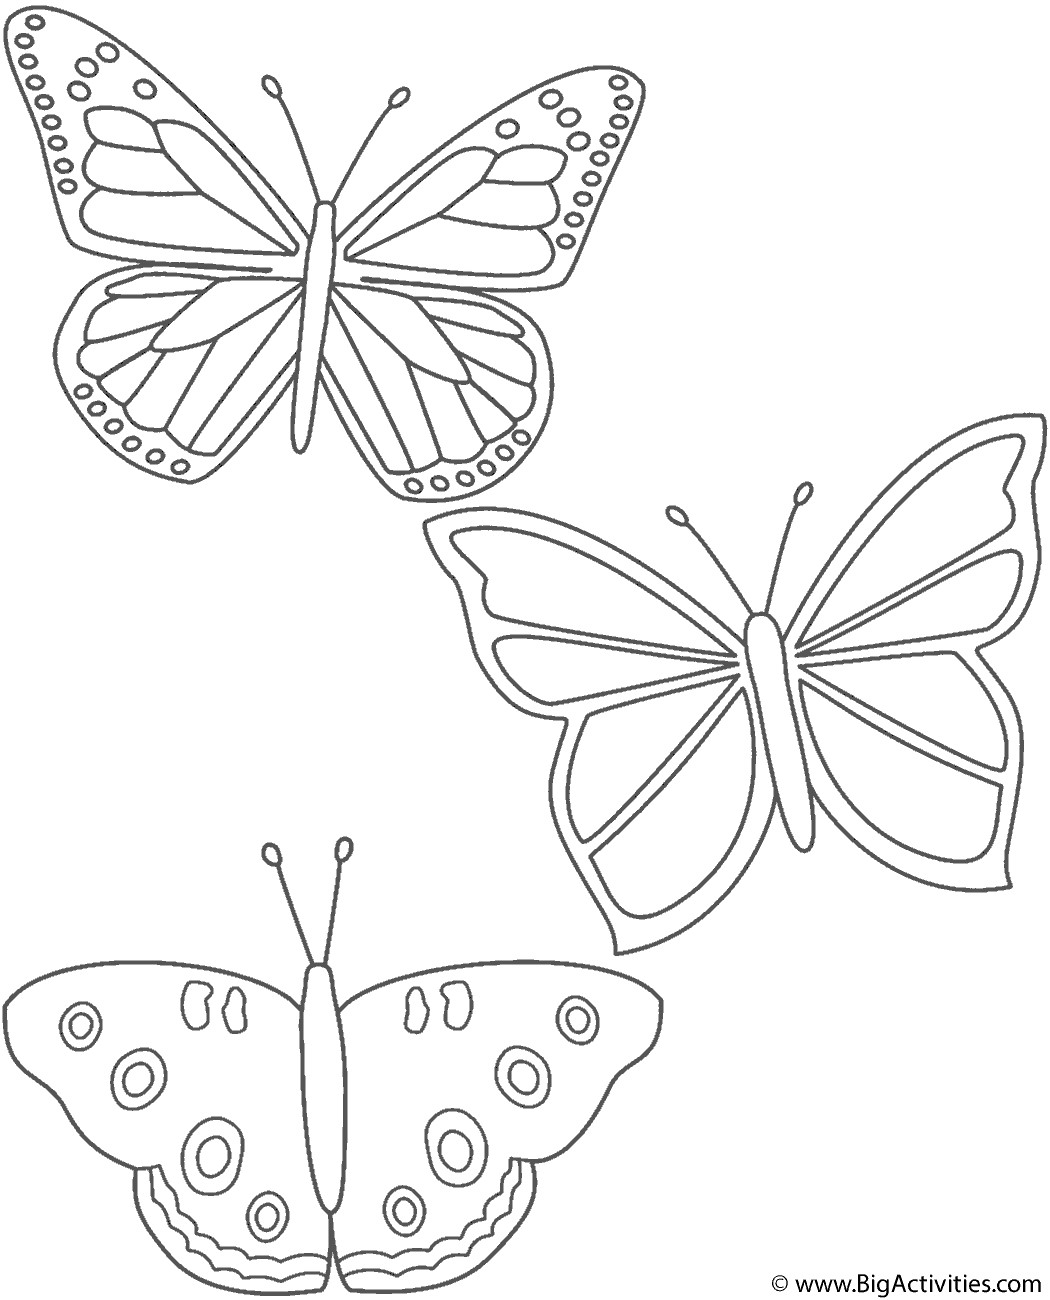 Butterflies Coloring Pages
 Three Butterflies Coloring Page Insects